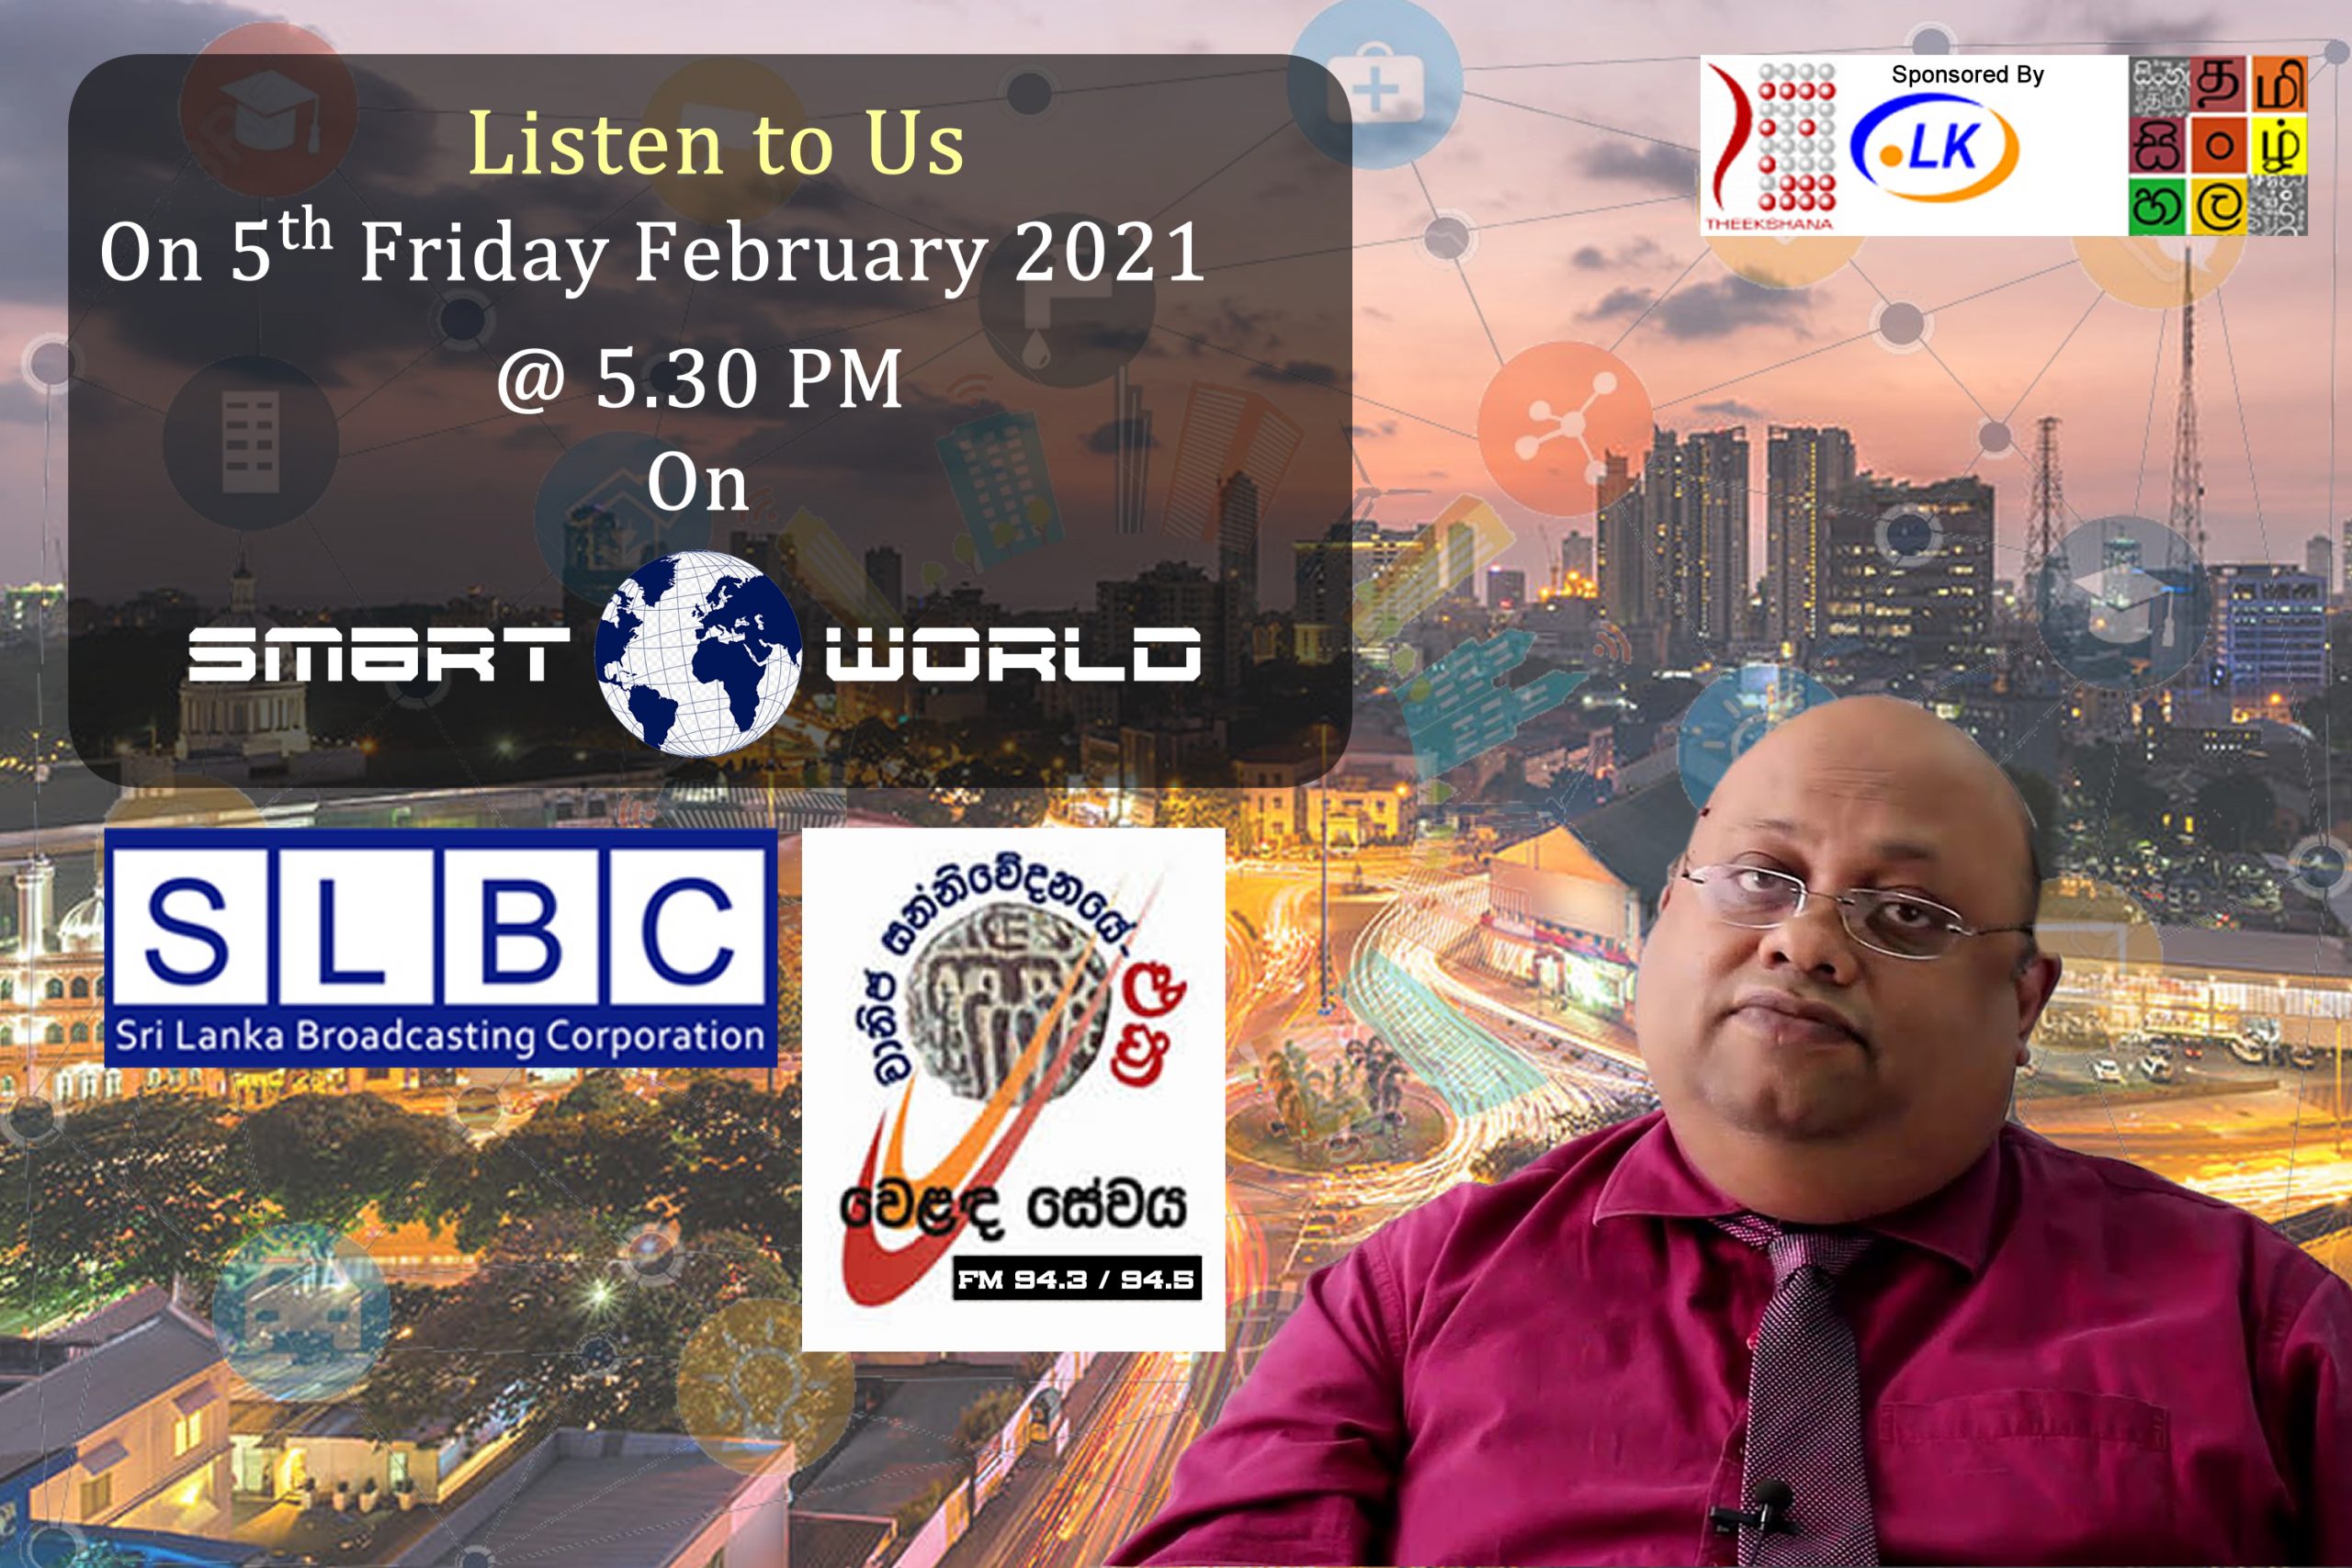 Listen to “Smart World” on this Friday (5th February 2021) at 5.30 pm on SLBC Sinhala Commercial Service (FM 94.3 / 94.5)